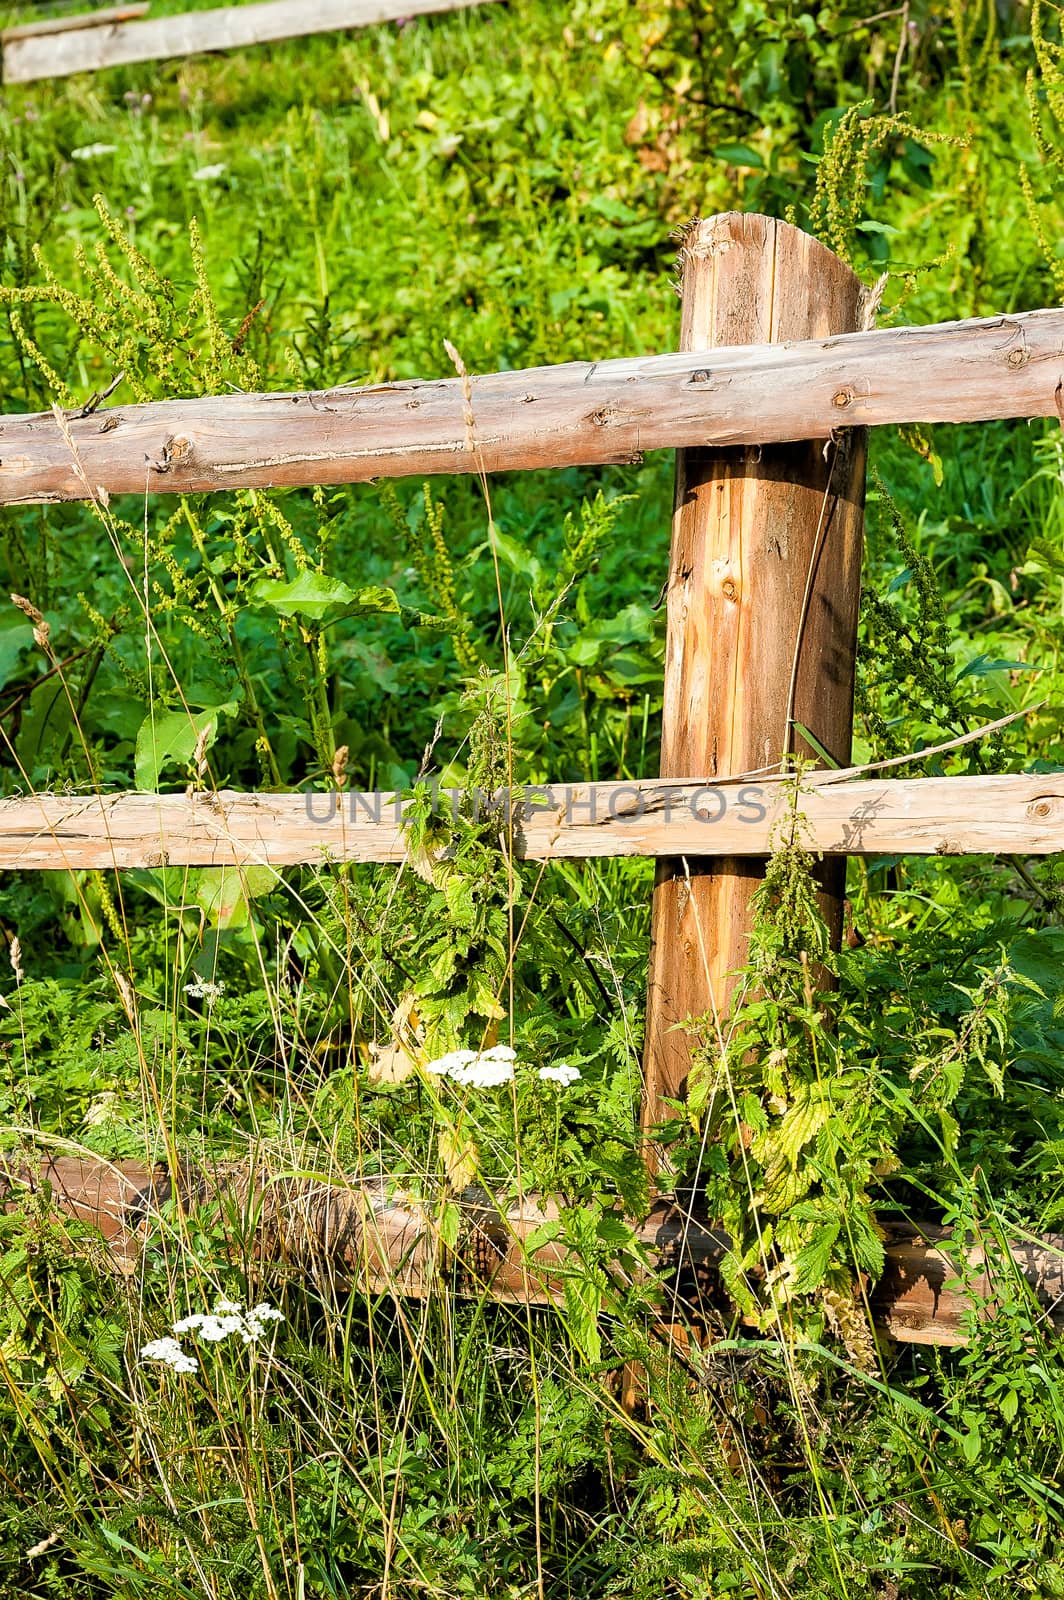 A detail of a wooden fence in the Ukrainian Carpathian Mountains